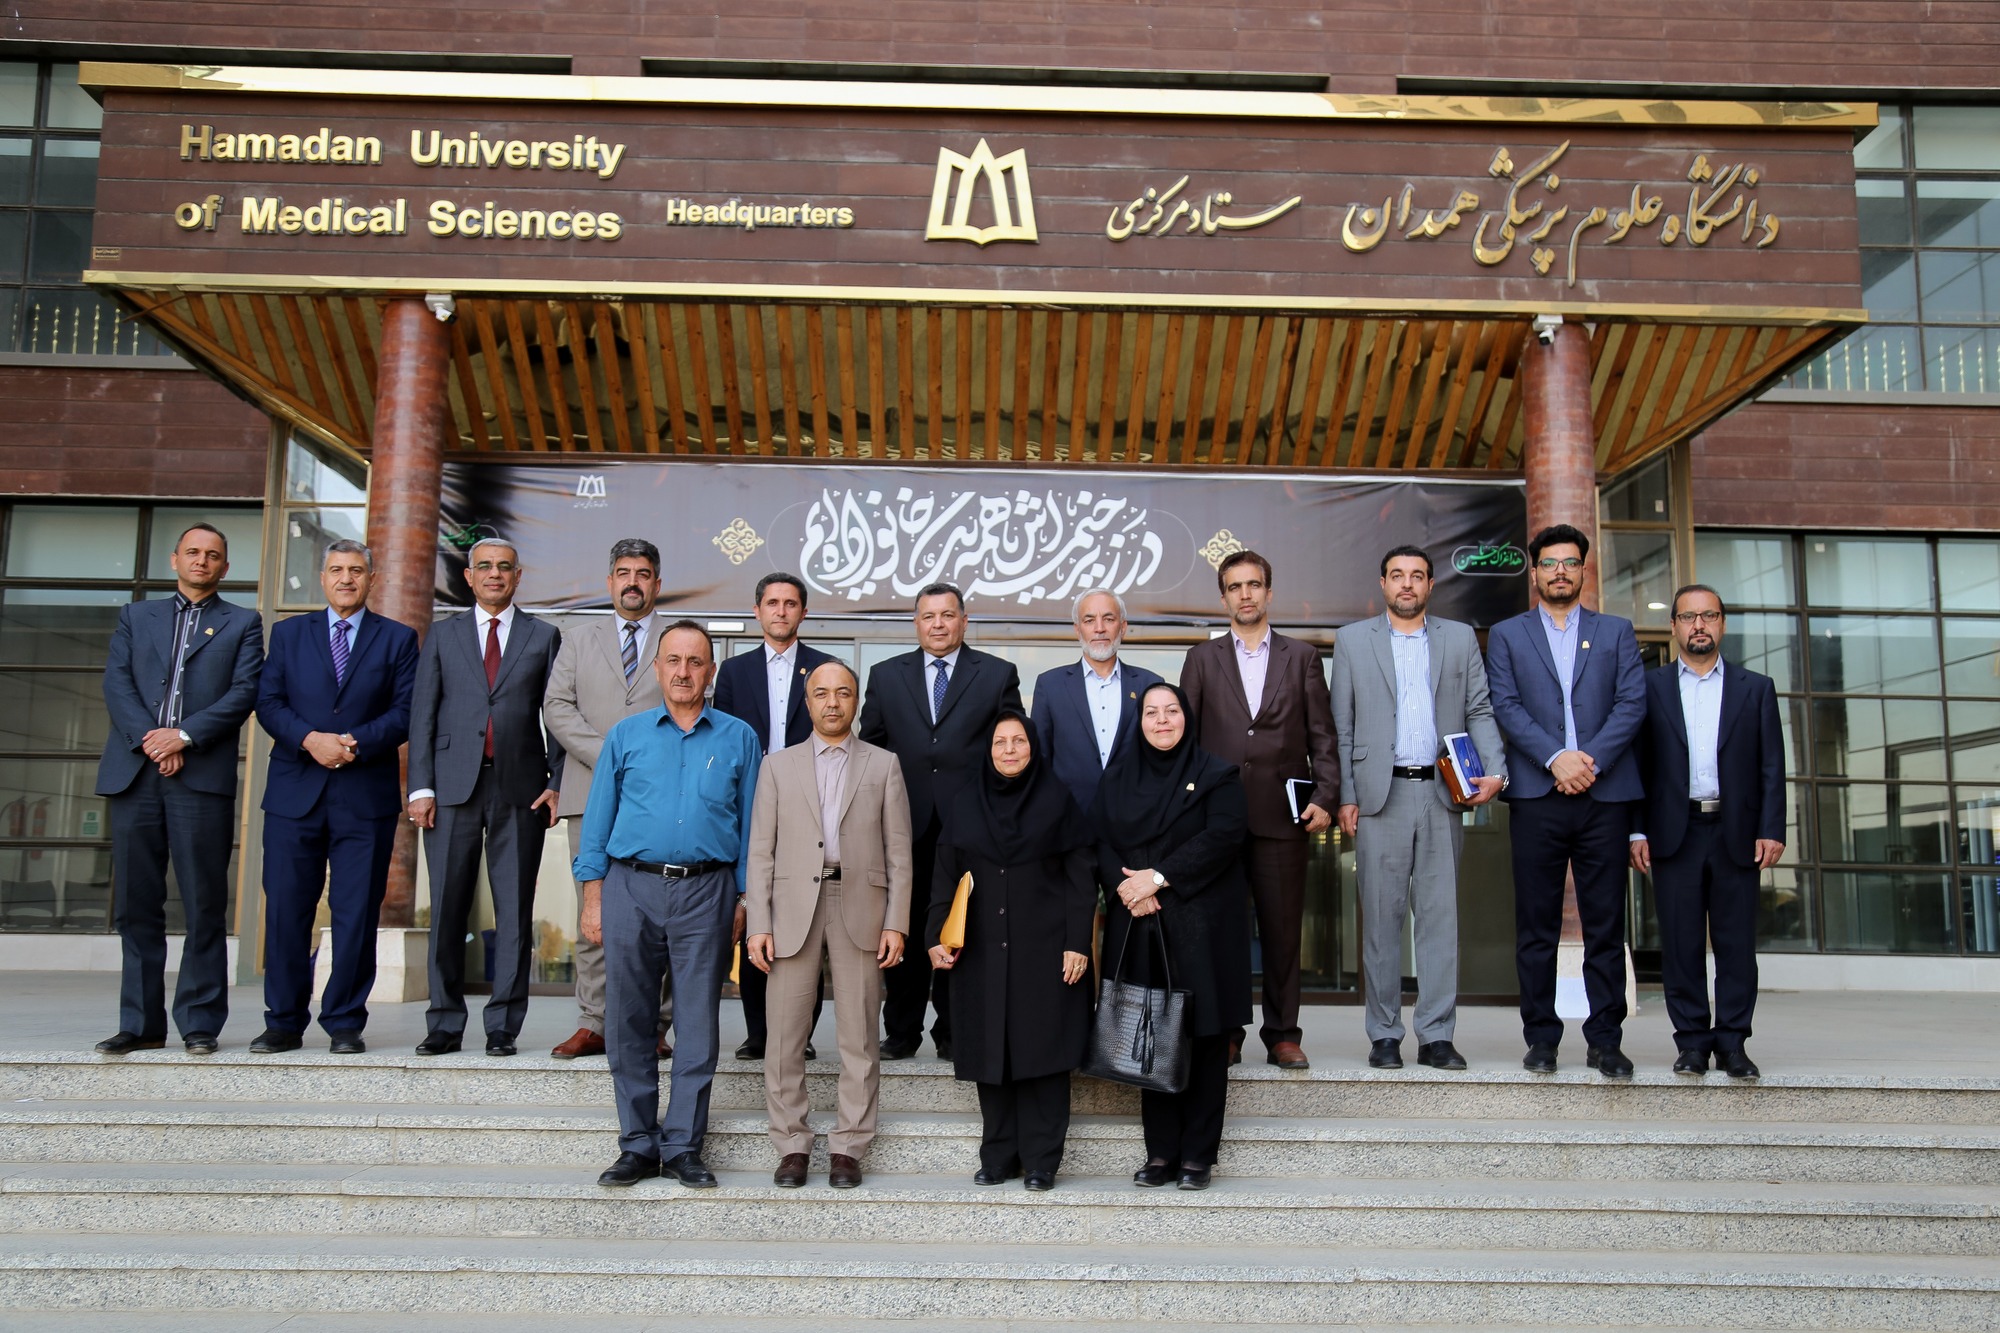 The meeting of the chancellors of four Iraqi universities with the chancellor of Hamadan University of Medical Sciences.